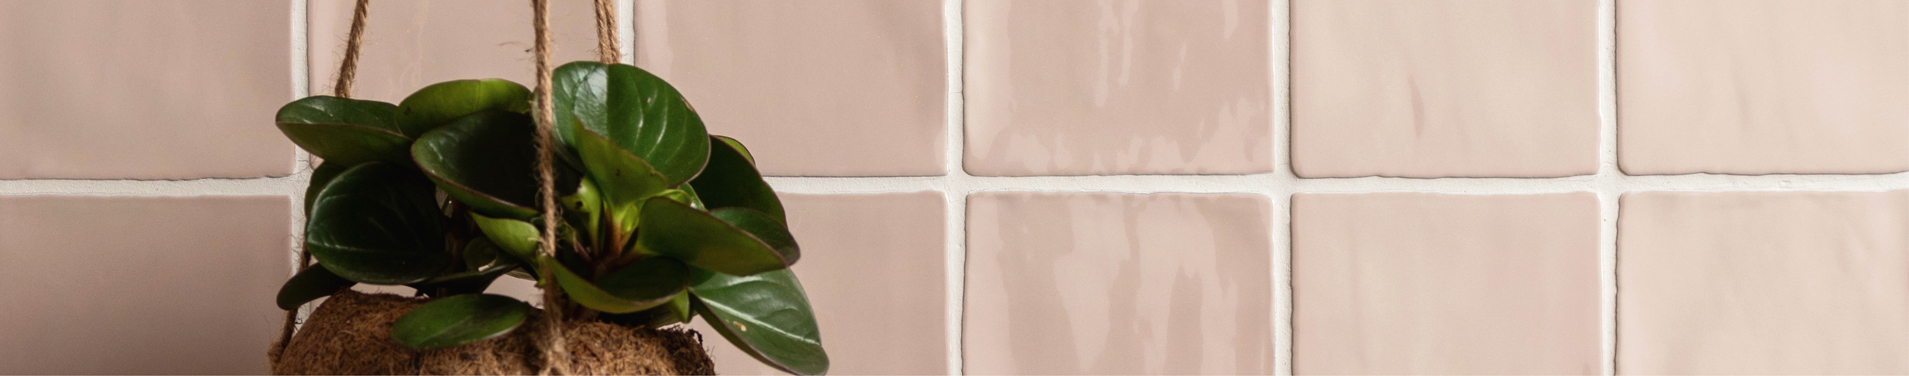 Handcrafted Tiles